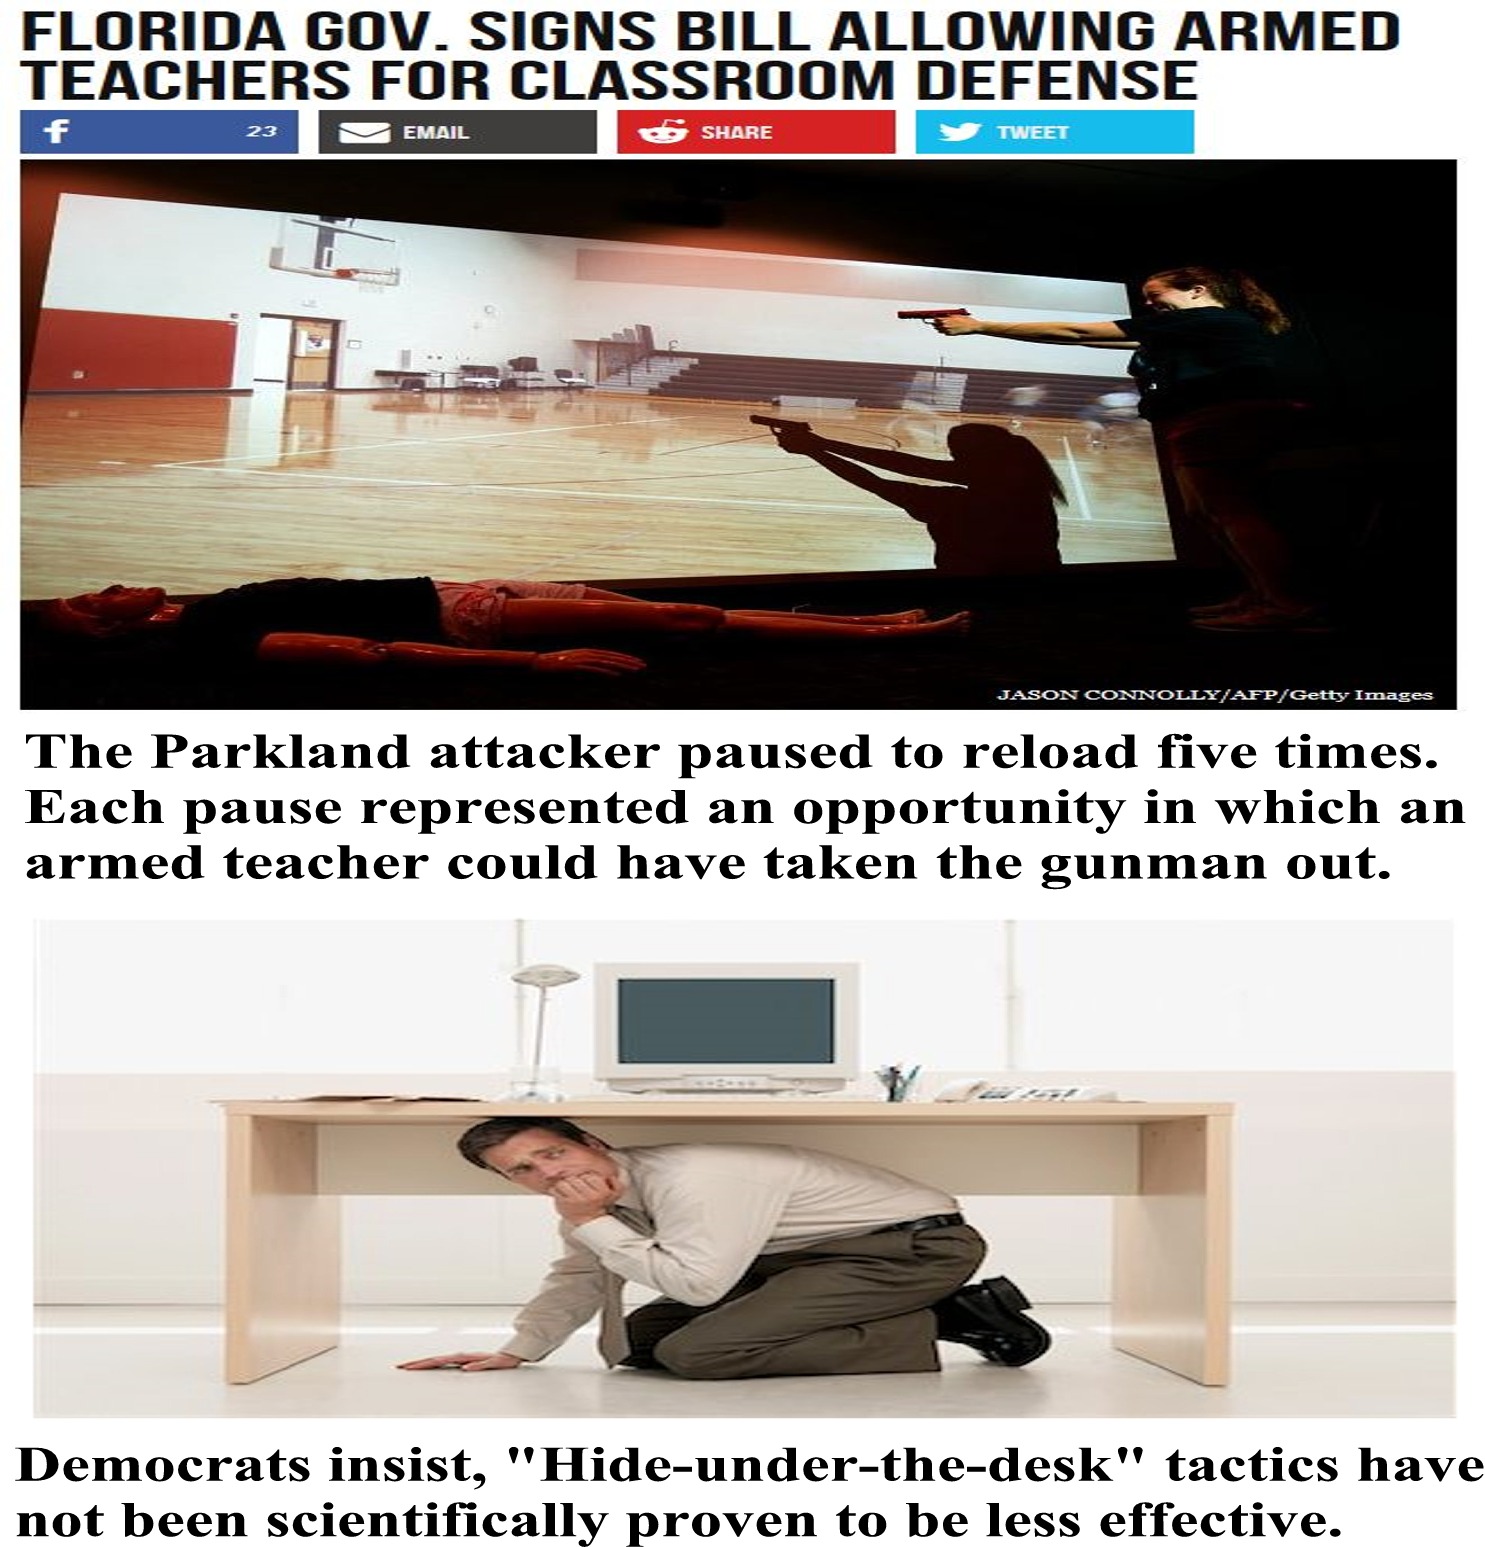 table - Florida Gov. Signs Bill Allowing Armed Teachers For Classroom Defense Iarnemerlangan The Parkland attacker paused to reload five times. Each pause represented an opportunity in which an armed teacher could have taken the gunman out. Democrats insi